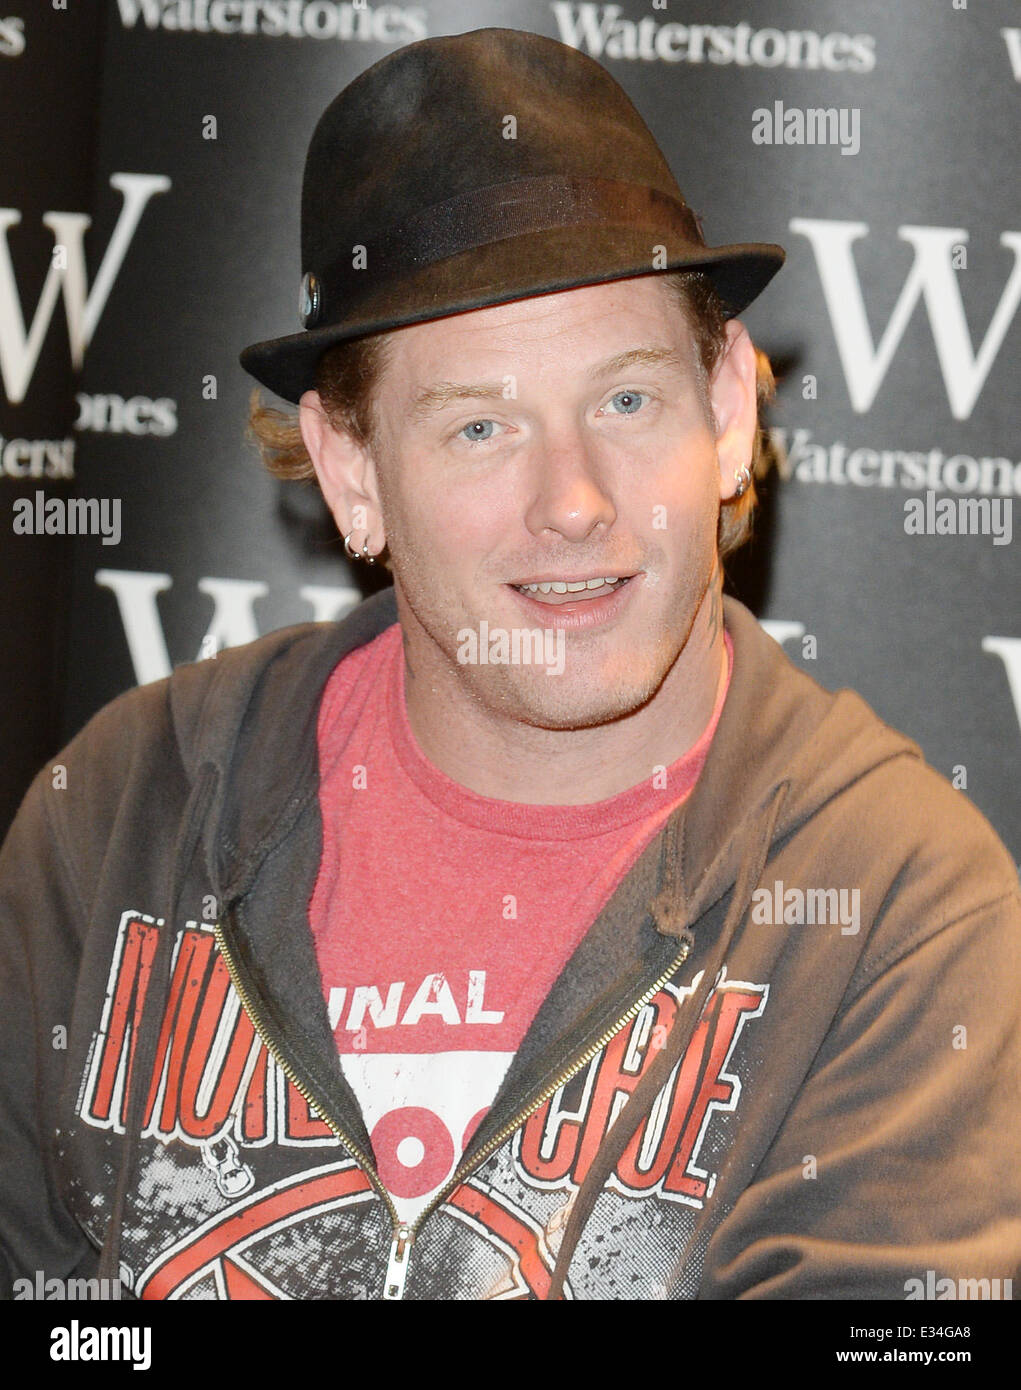 Corey Taylor signs copies of his new book 